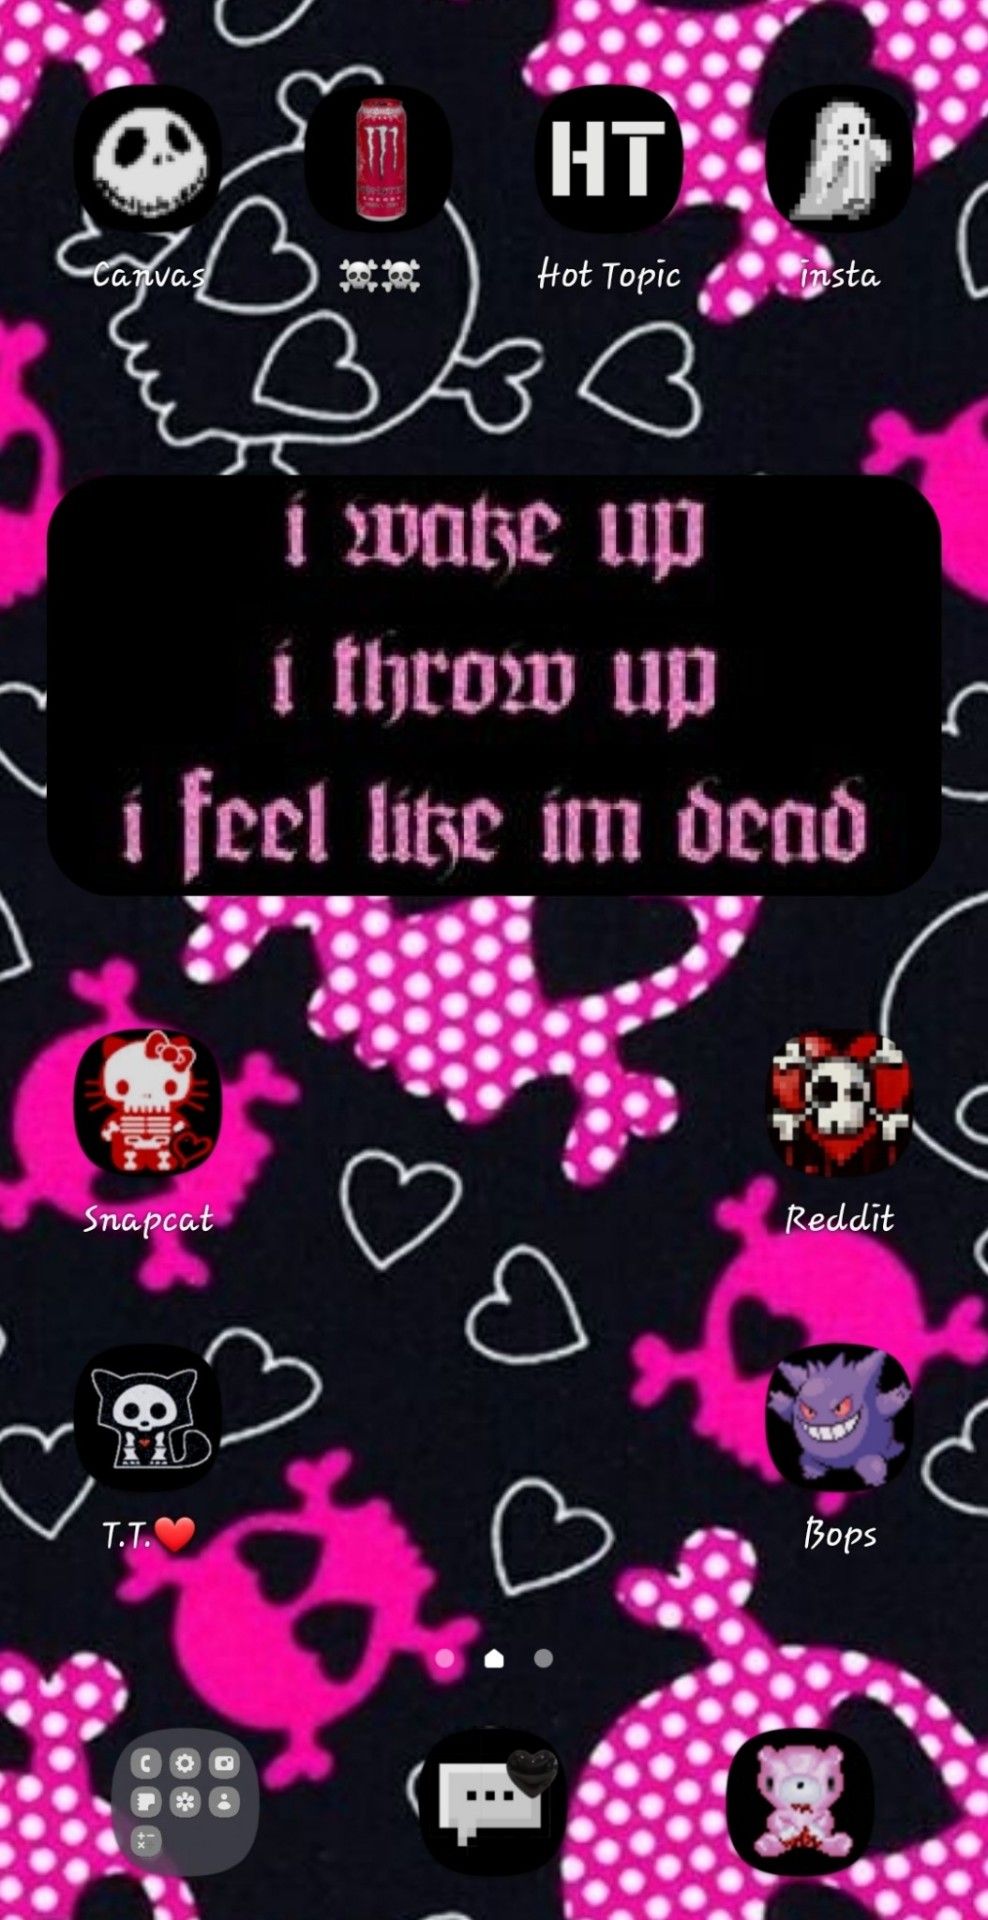 A black and pink phone screen with skulls - 2000s